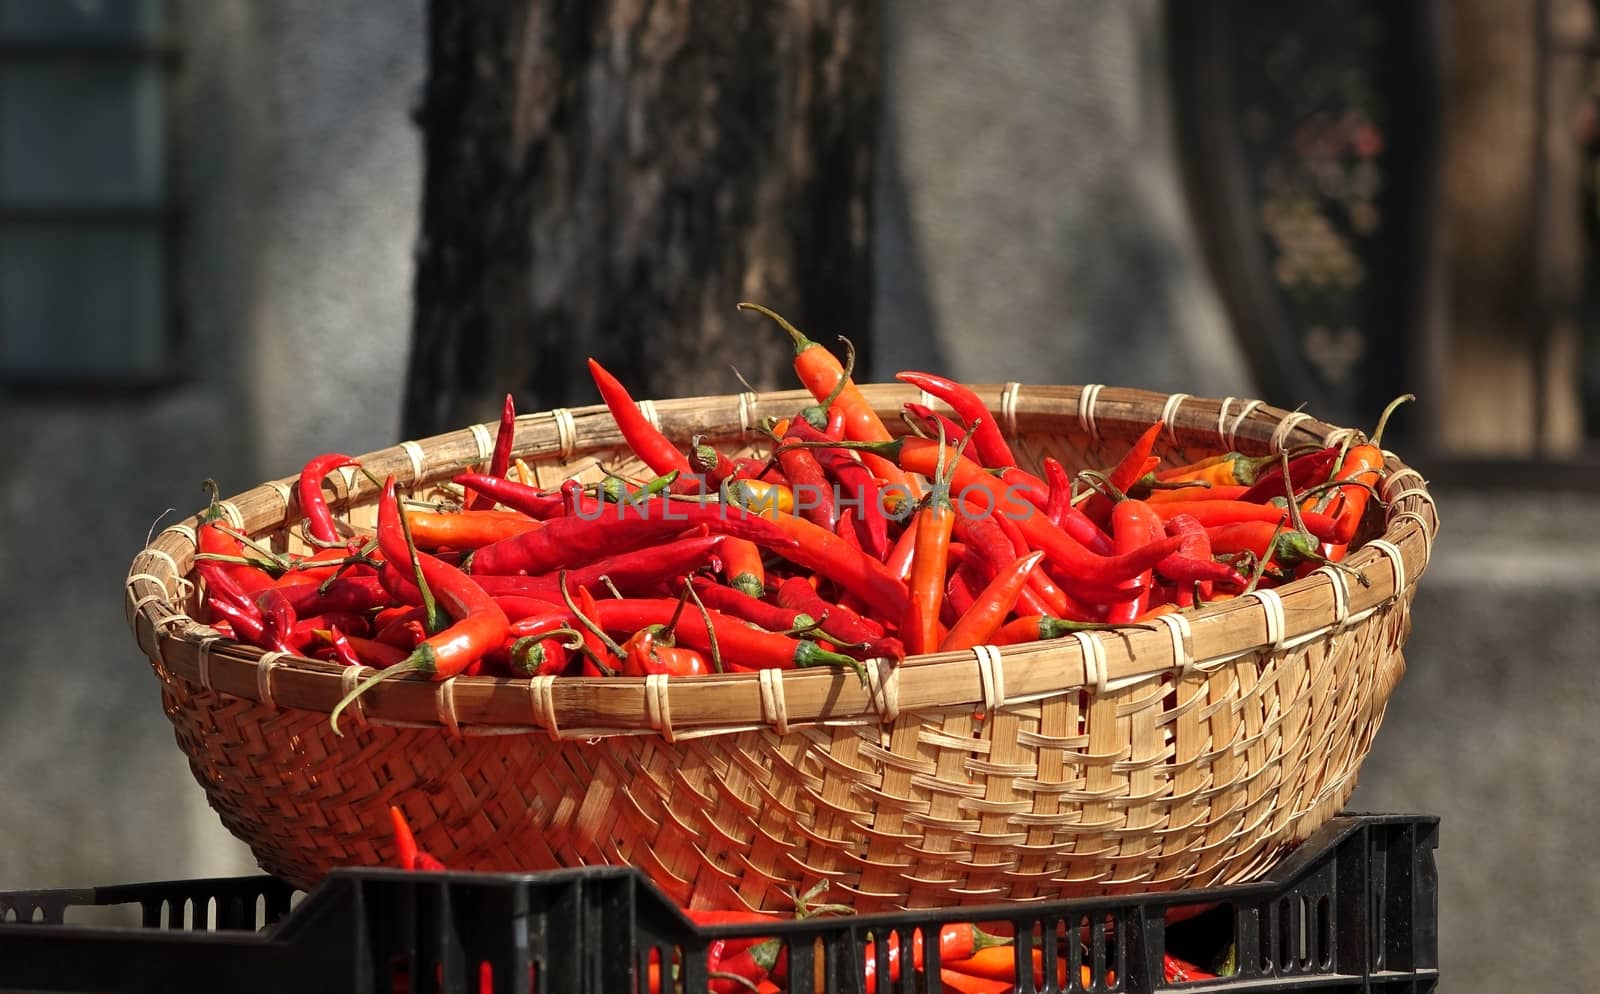 A basket with red hot chili peppers at a local market